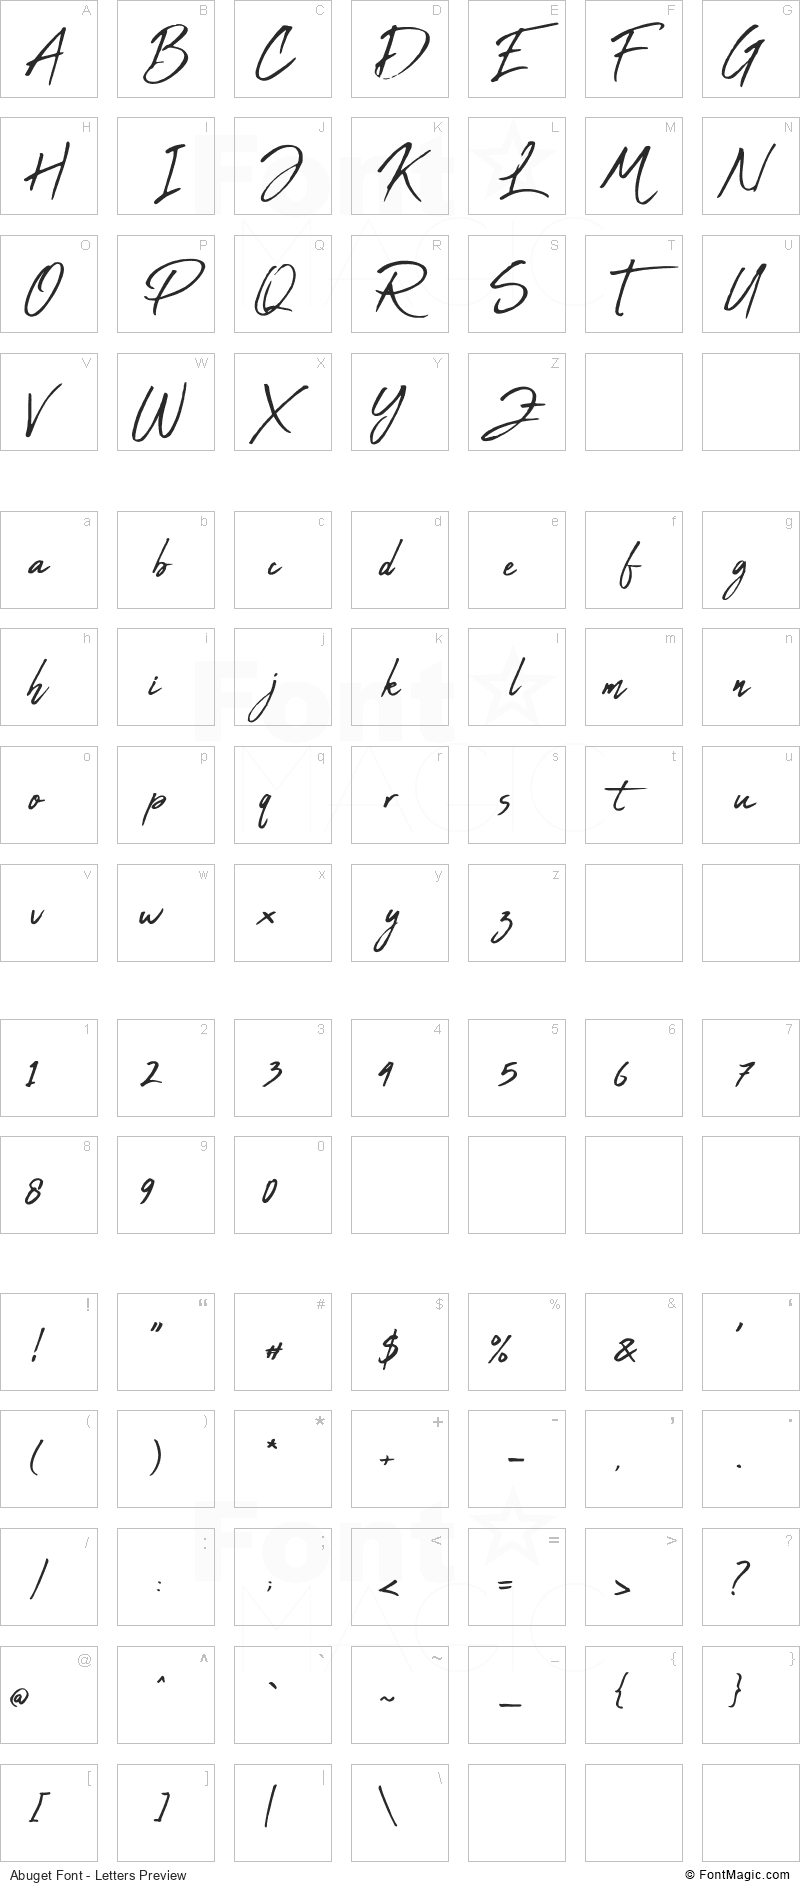 Abuget Font - All Latters Preview Chart